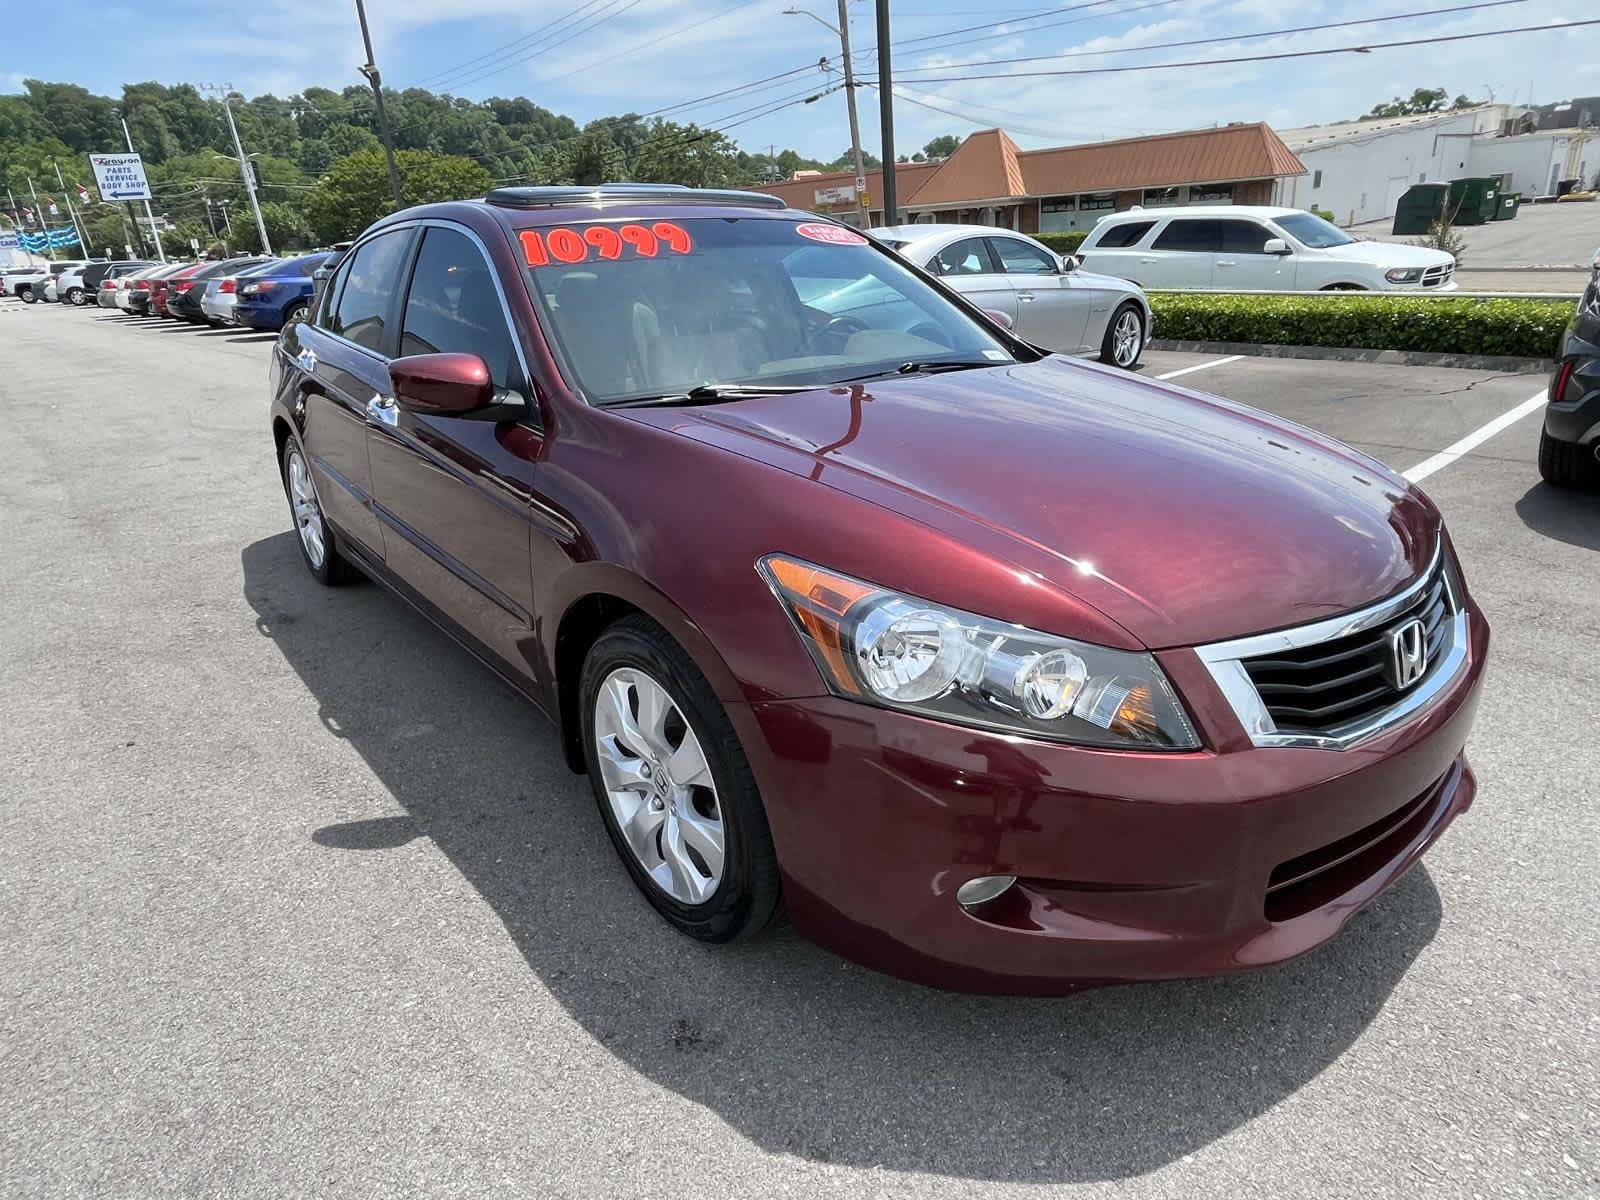 Used 2008 Honda Accord EX-L V6 with VIN 1HGCP36888A058761 for sale in Knoxville, TN